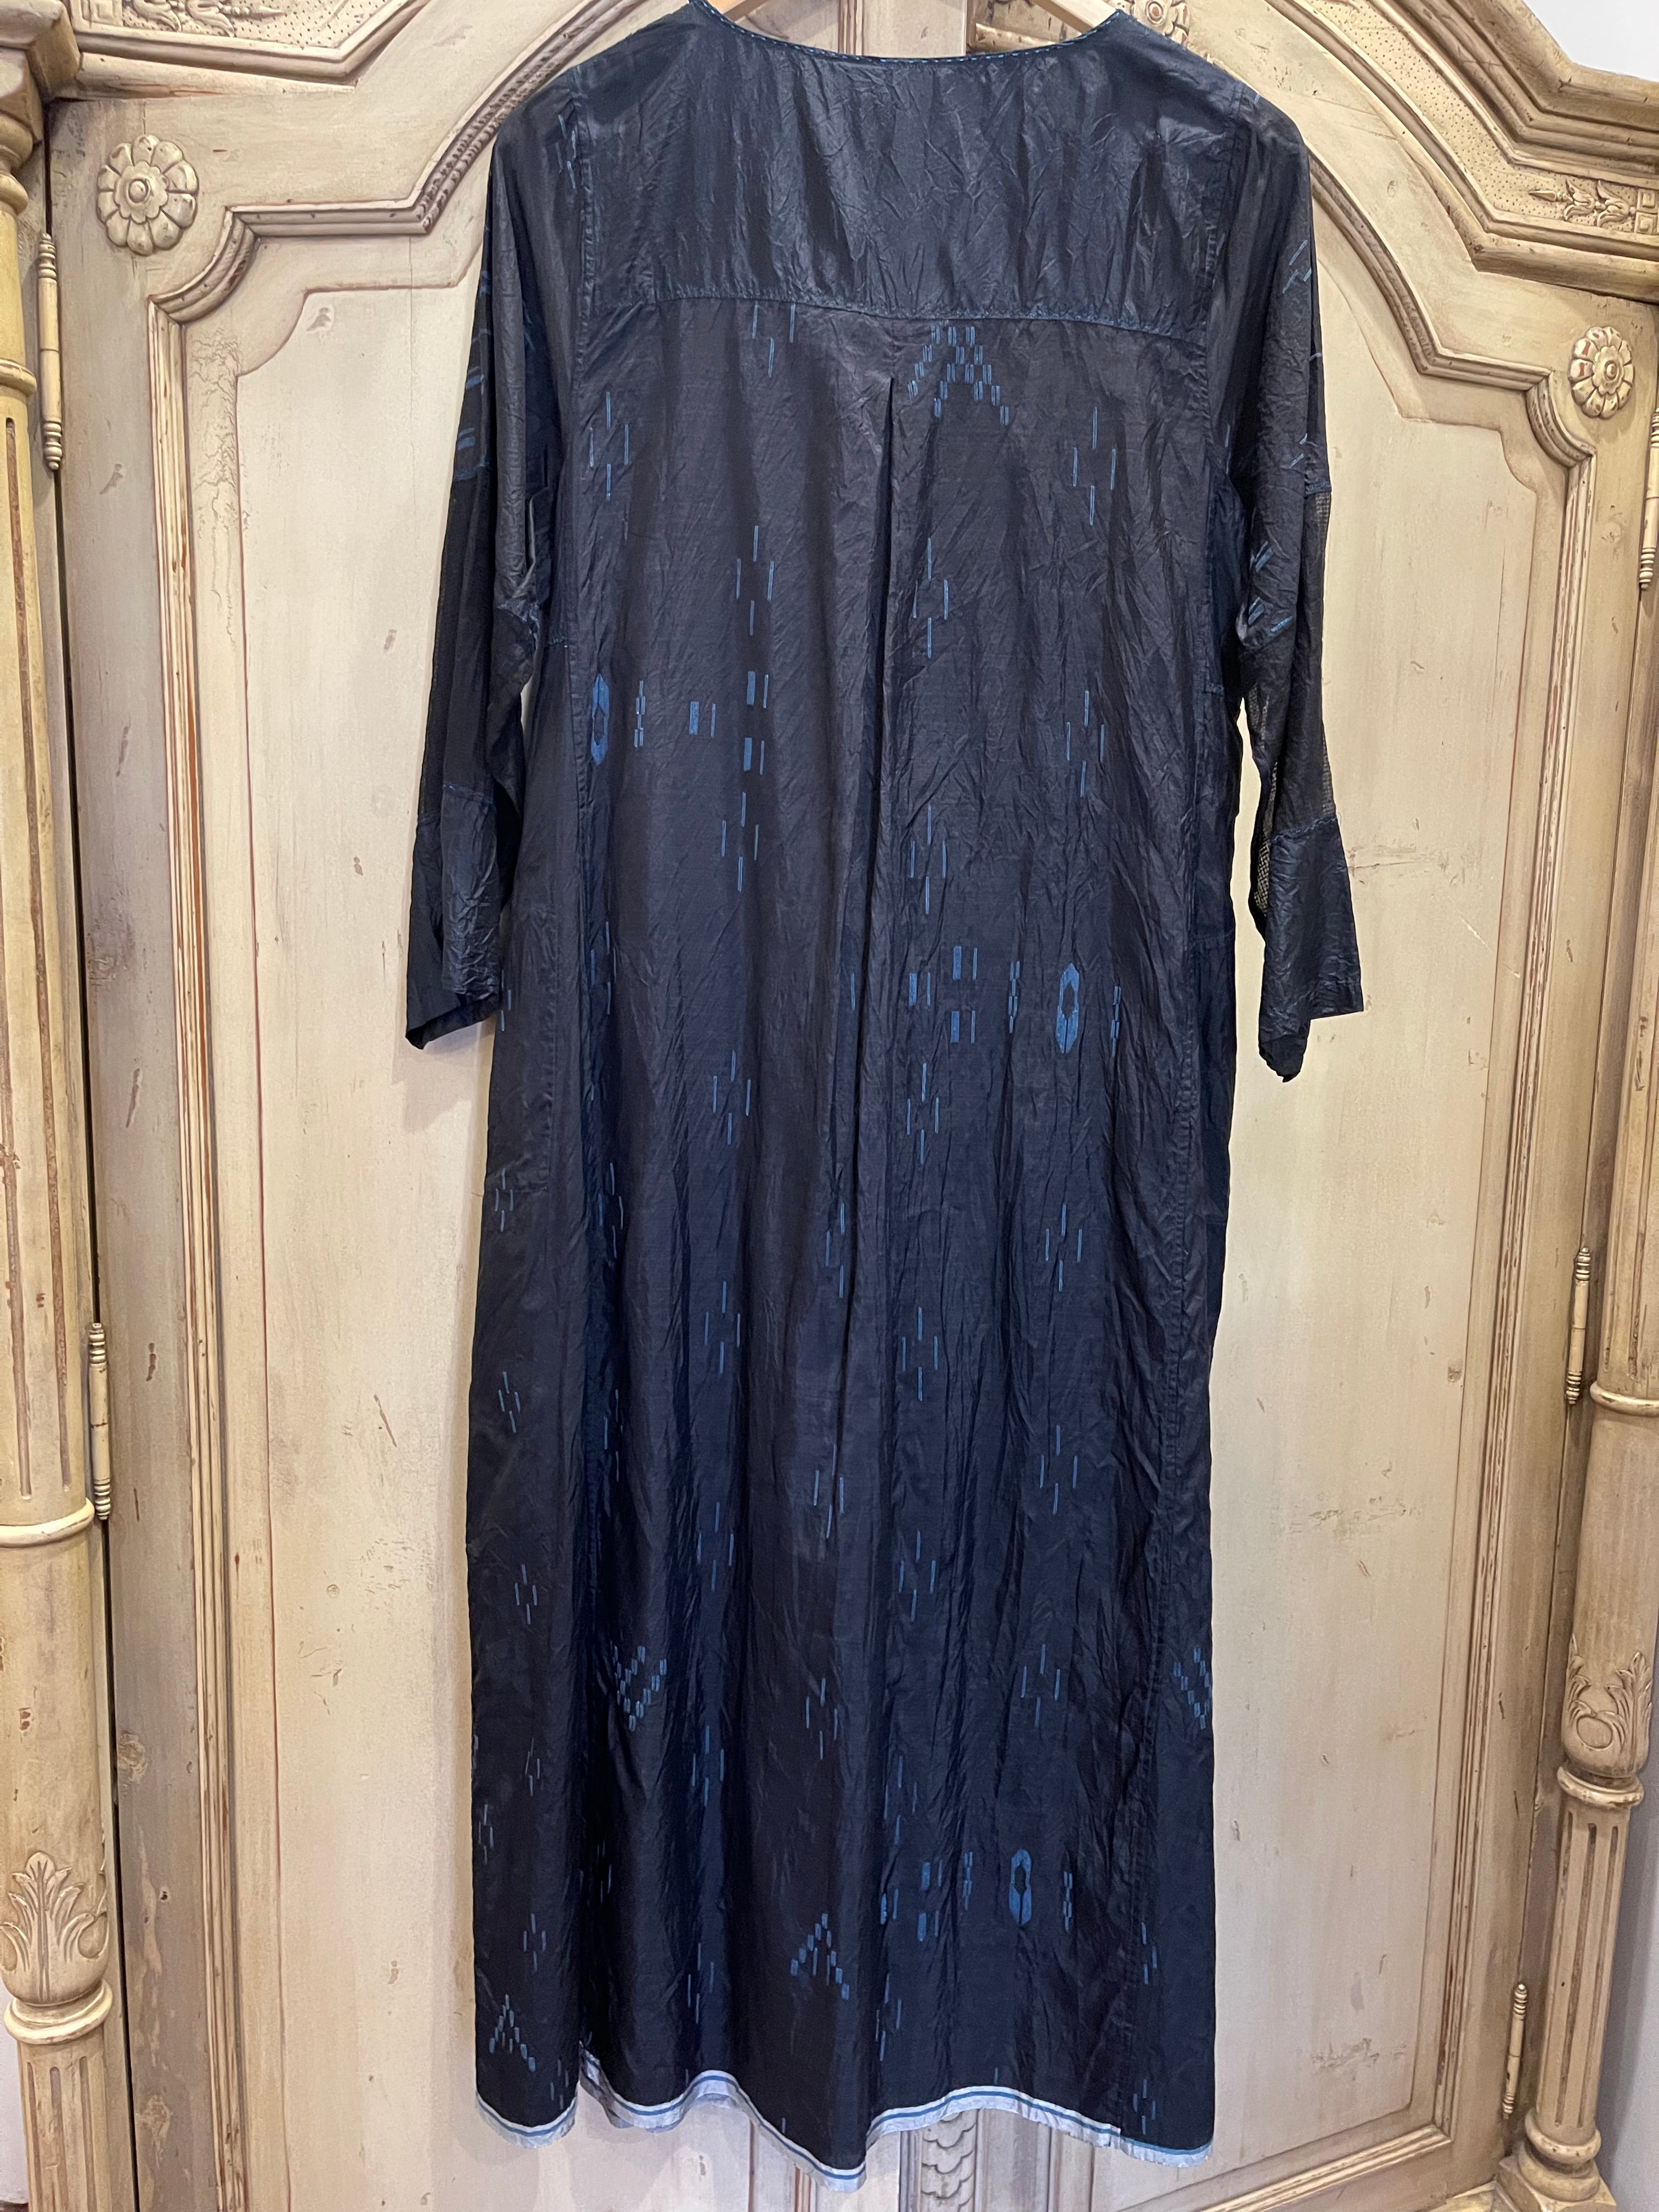 NEEL 08 Easy to wear mid length ink blue indigo day dress with scooped neck with contrasting french blue stitching detail.